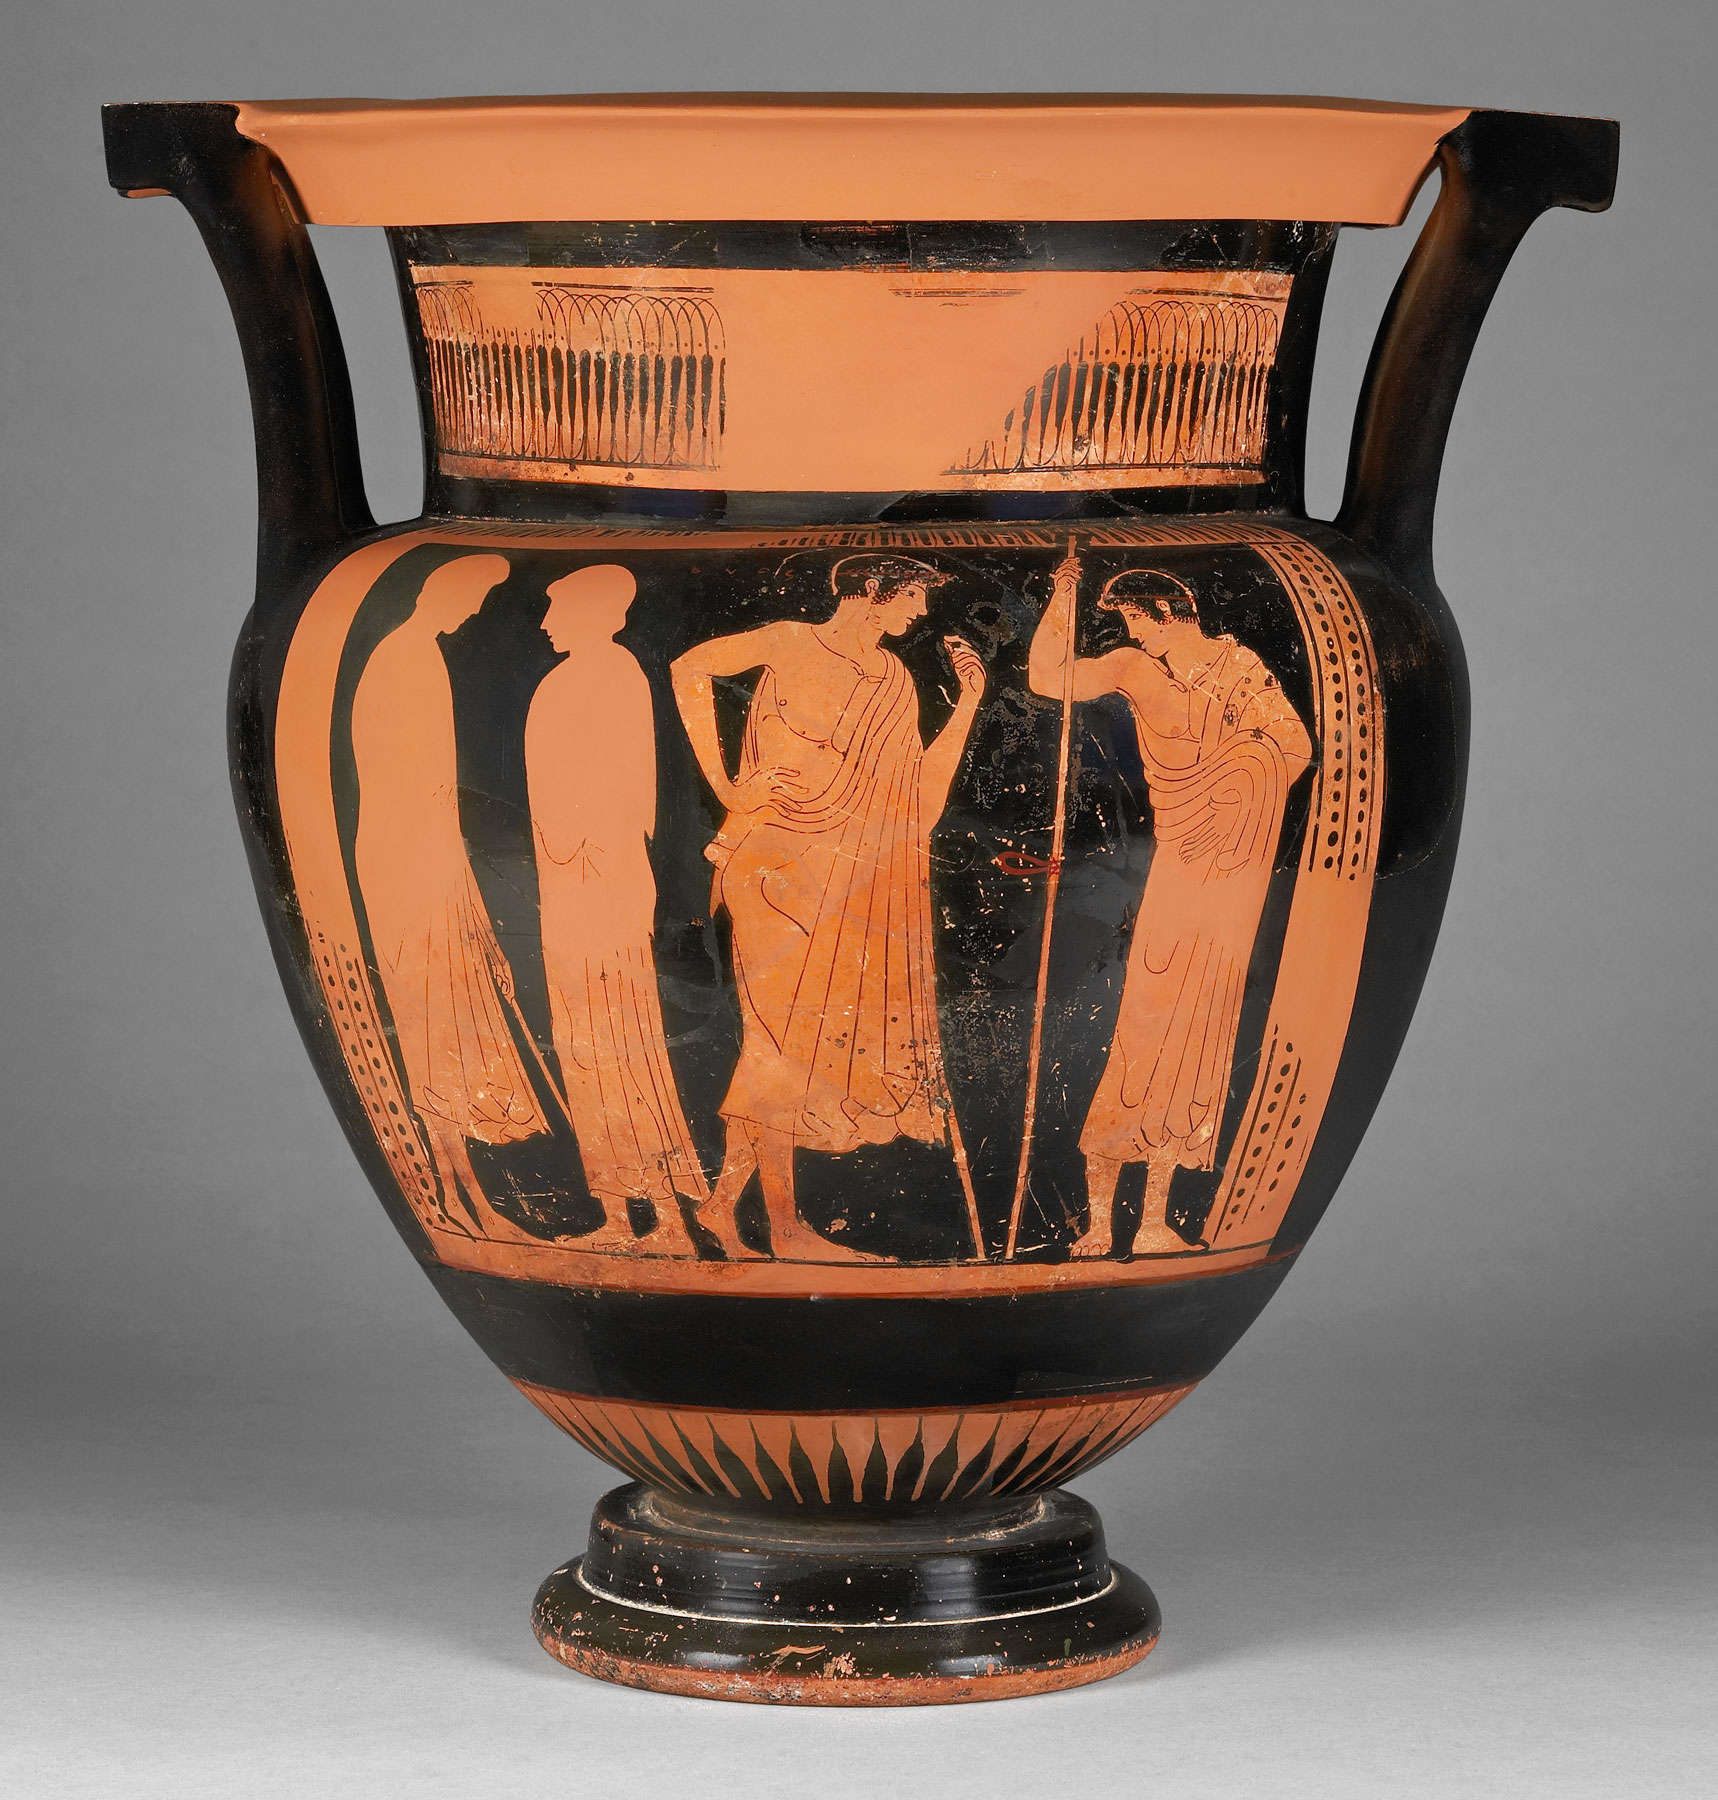 One view of a vase, with the body decoration showing four people